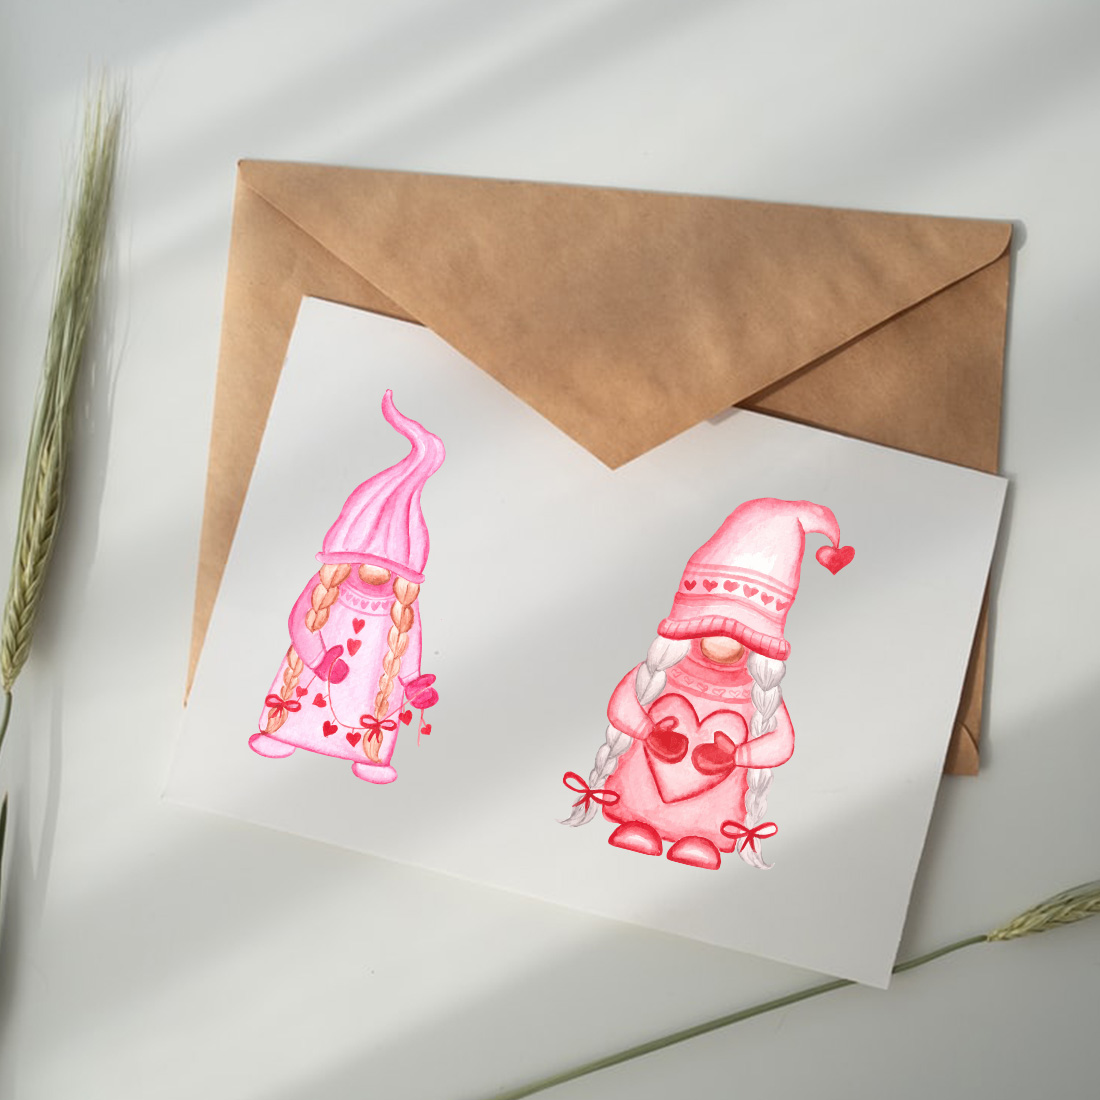 Image postcard with pink gnomes